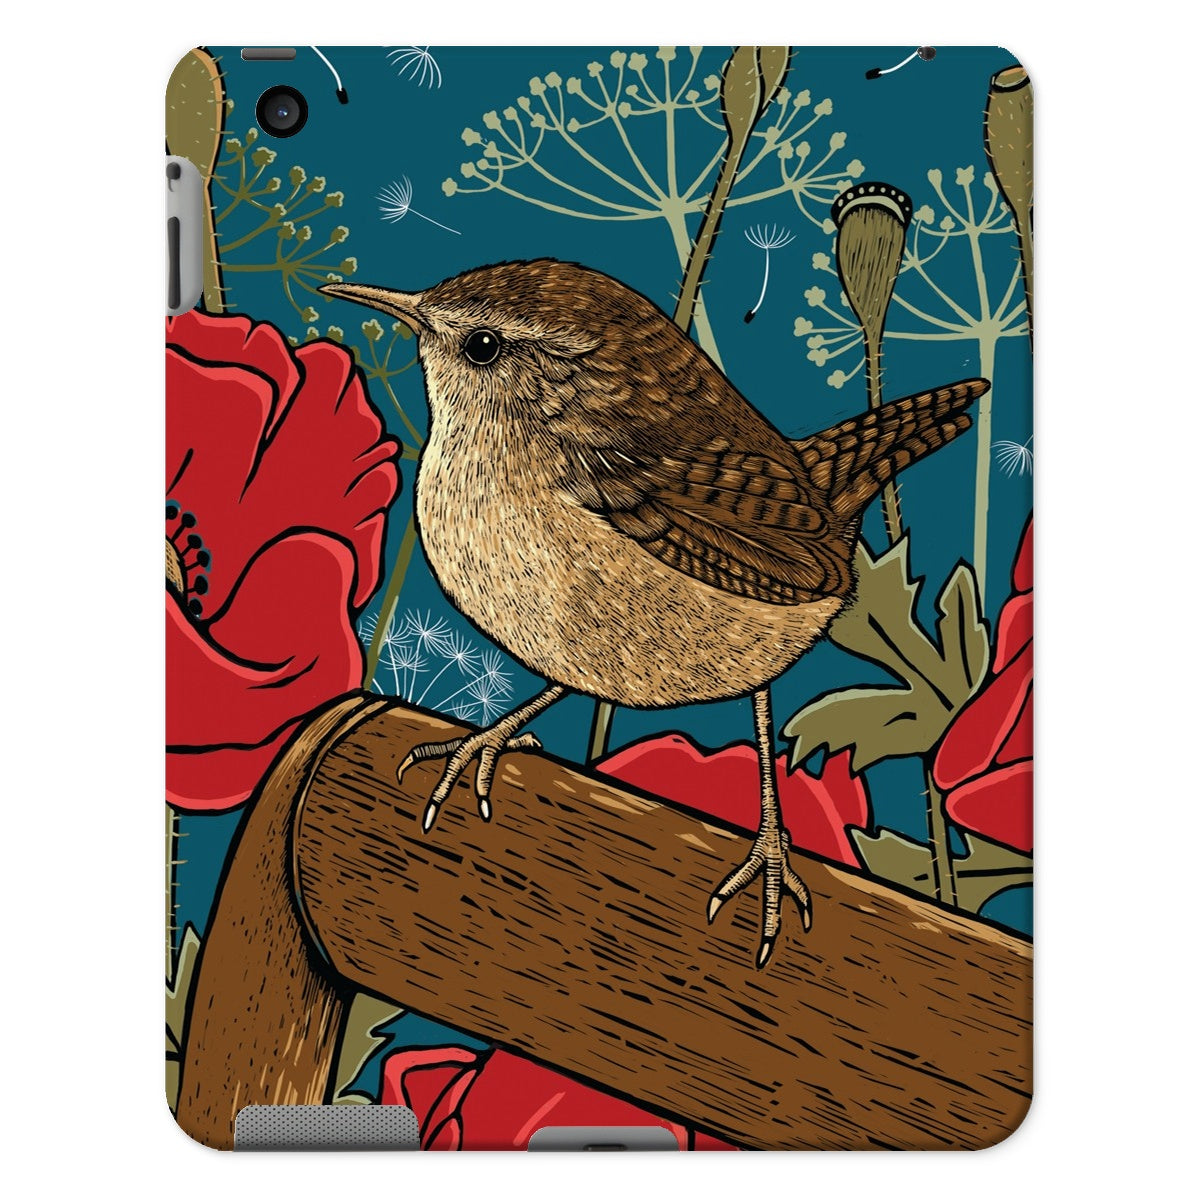 Poppies and Wren design on tablet case, to buy